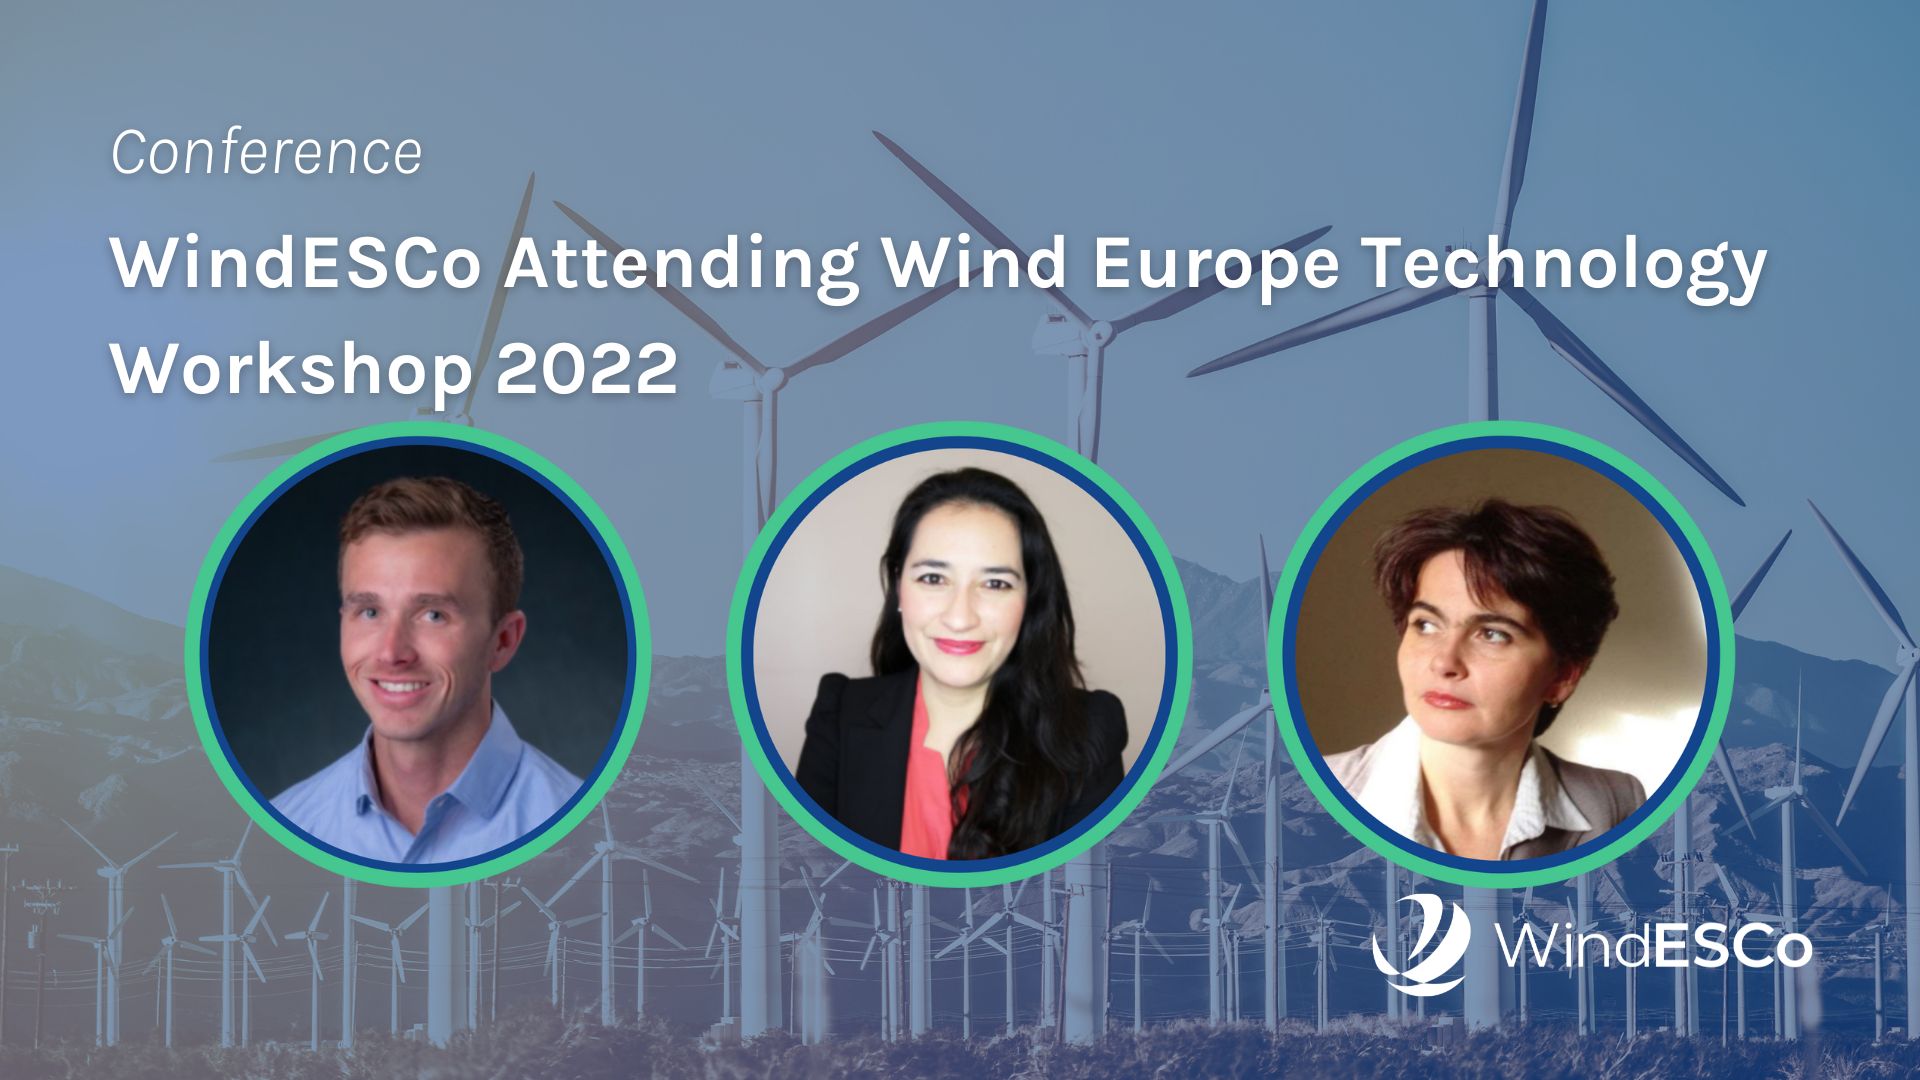 Meet WindESCo in Brussels at the Wind Europe Technology Workshop